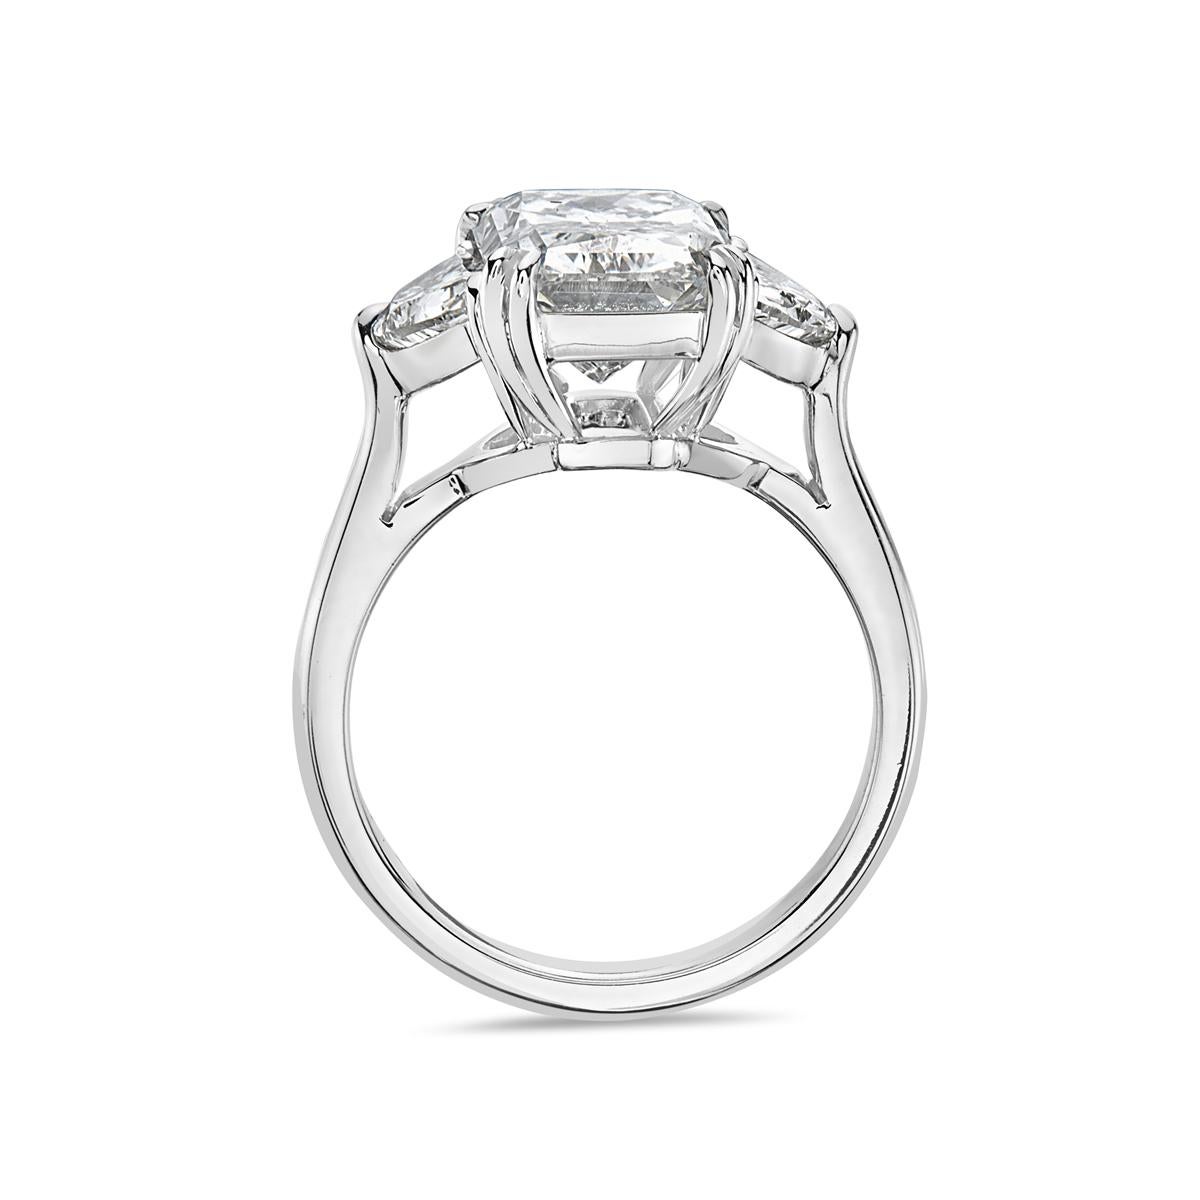 This engagement ring features a 5.01 carat rectangular radiant G VS1 cut diamond mounted in platinum flanked by two half moon G-H VVS-VS diamonds. 9.1 grams total weight. Made in USA. GIA Report No. 10048814. 

Can be resized upon request.

Viewings